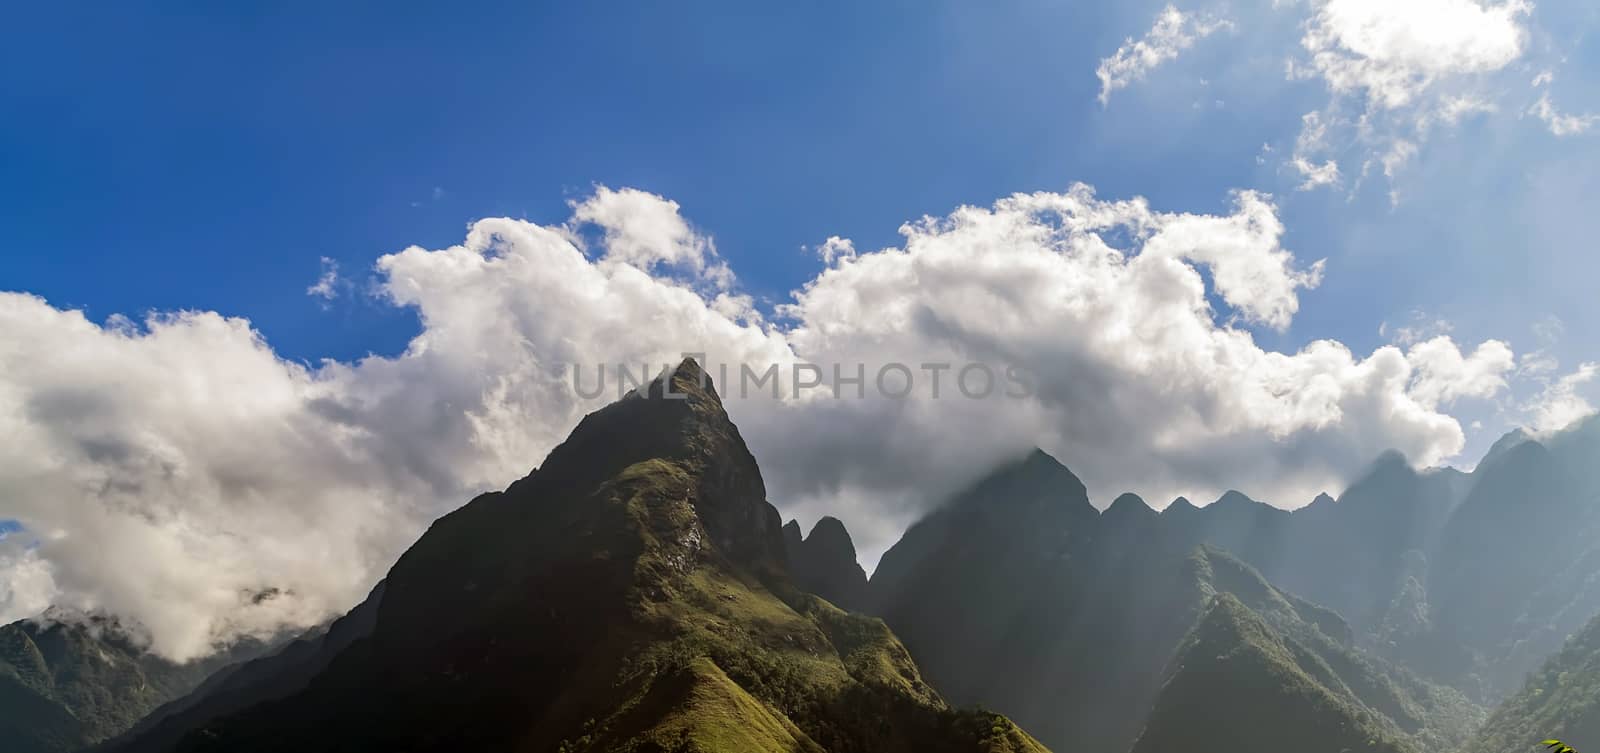 Mountain peaks himalayan fog scenery landscape top above the clouds